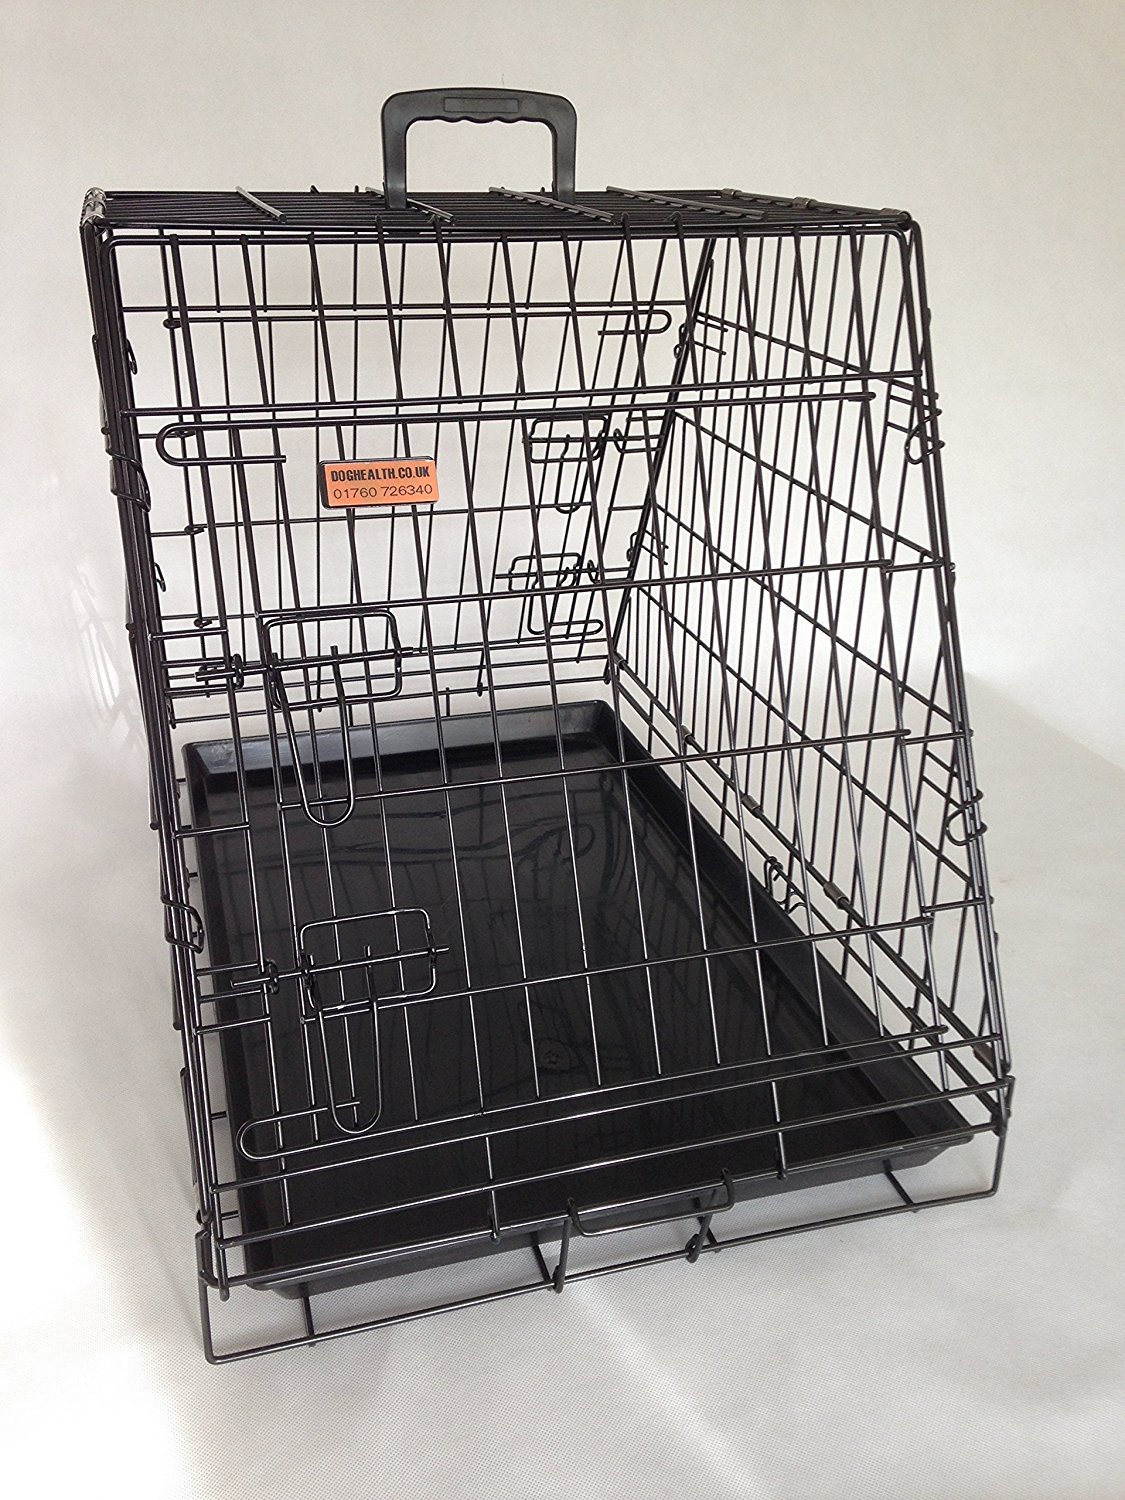 Single Sloping Dog Crate for Car Boot Review